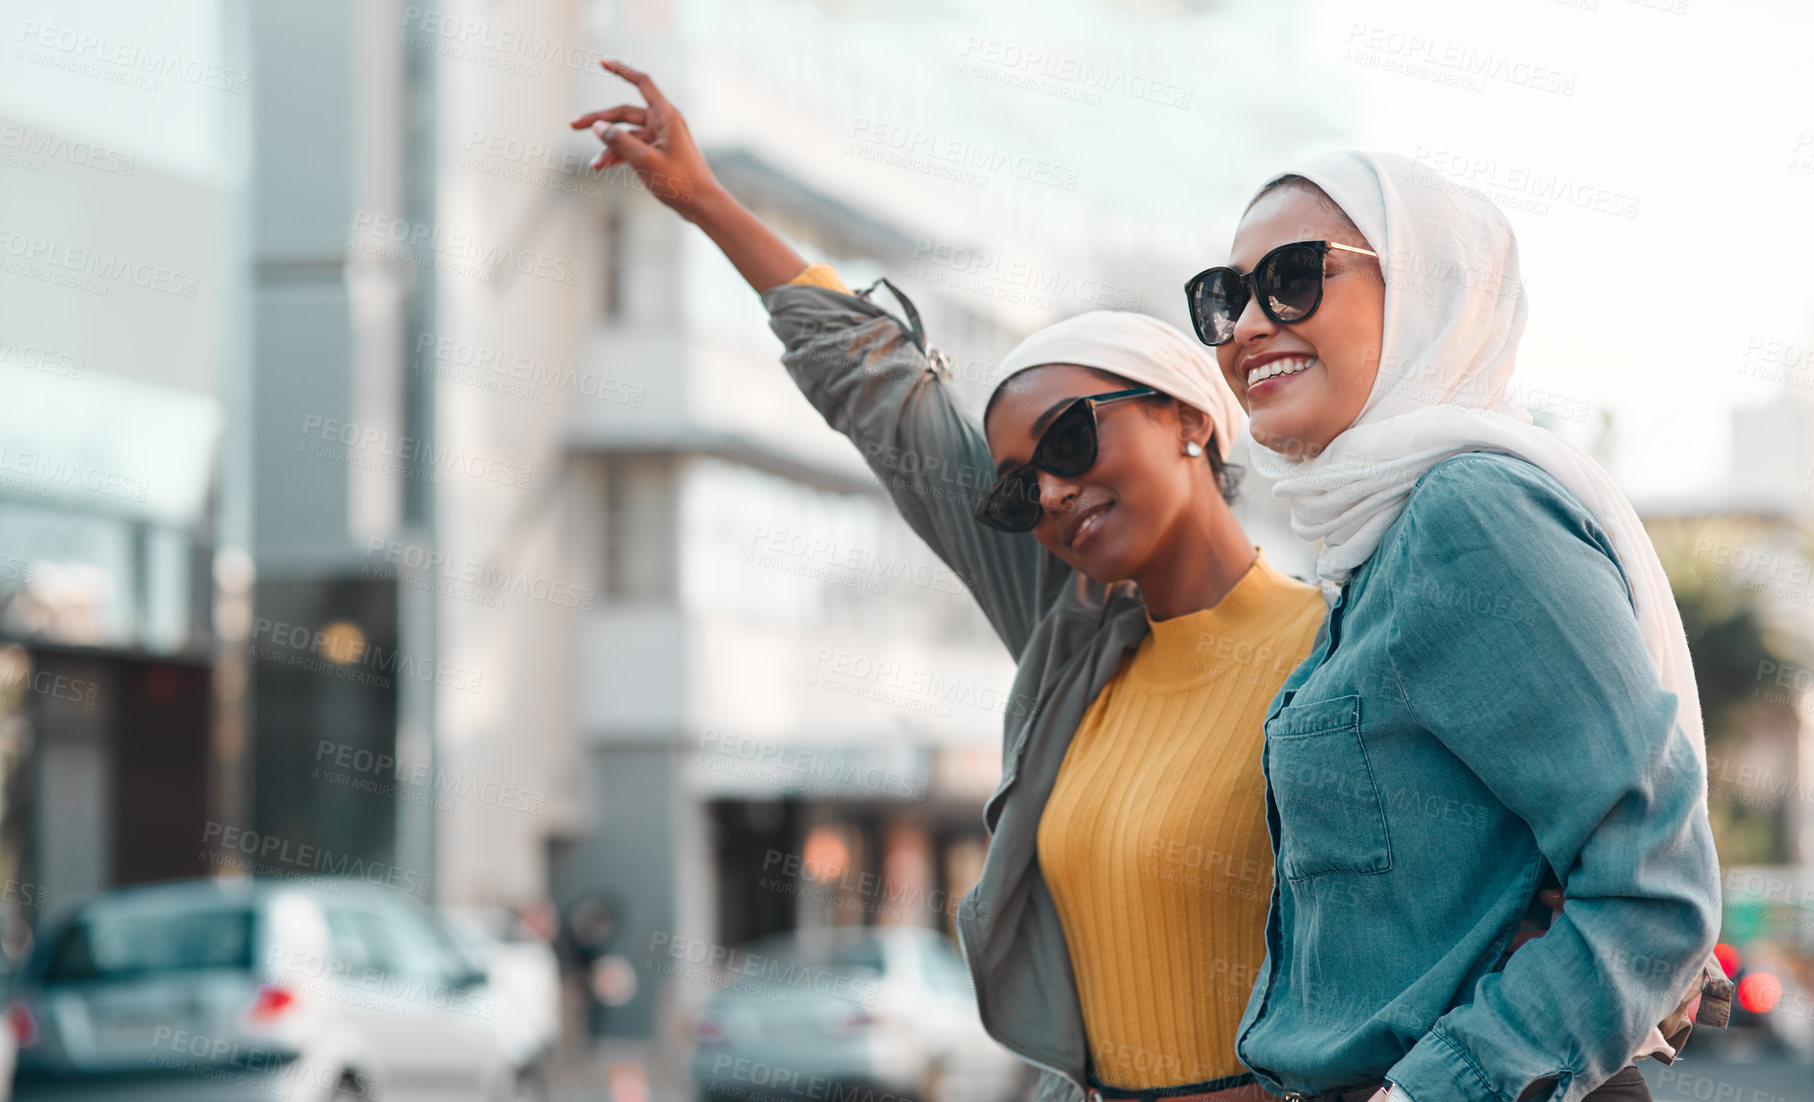 Buy stock photo Cropped shot of two attractive young women wearing sunglasses and headscarves while hailing a taxi in the city